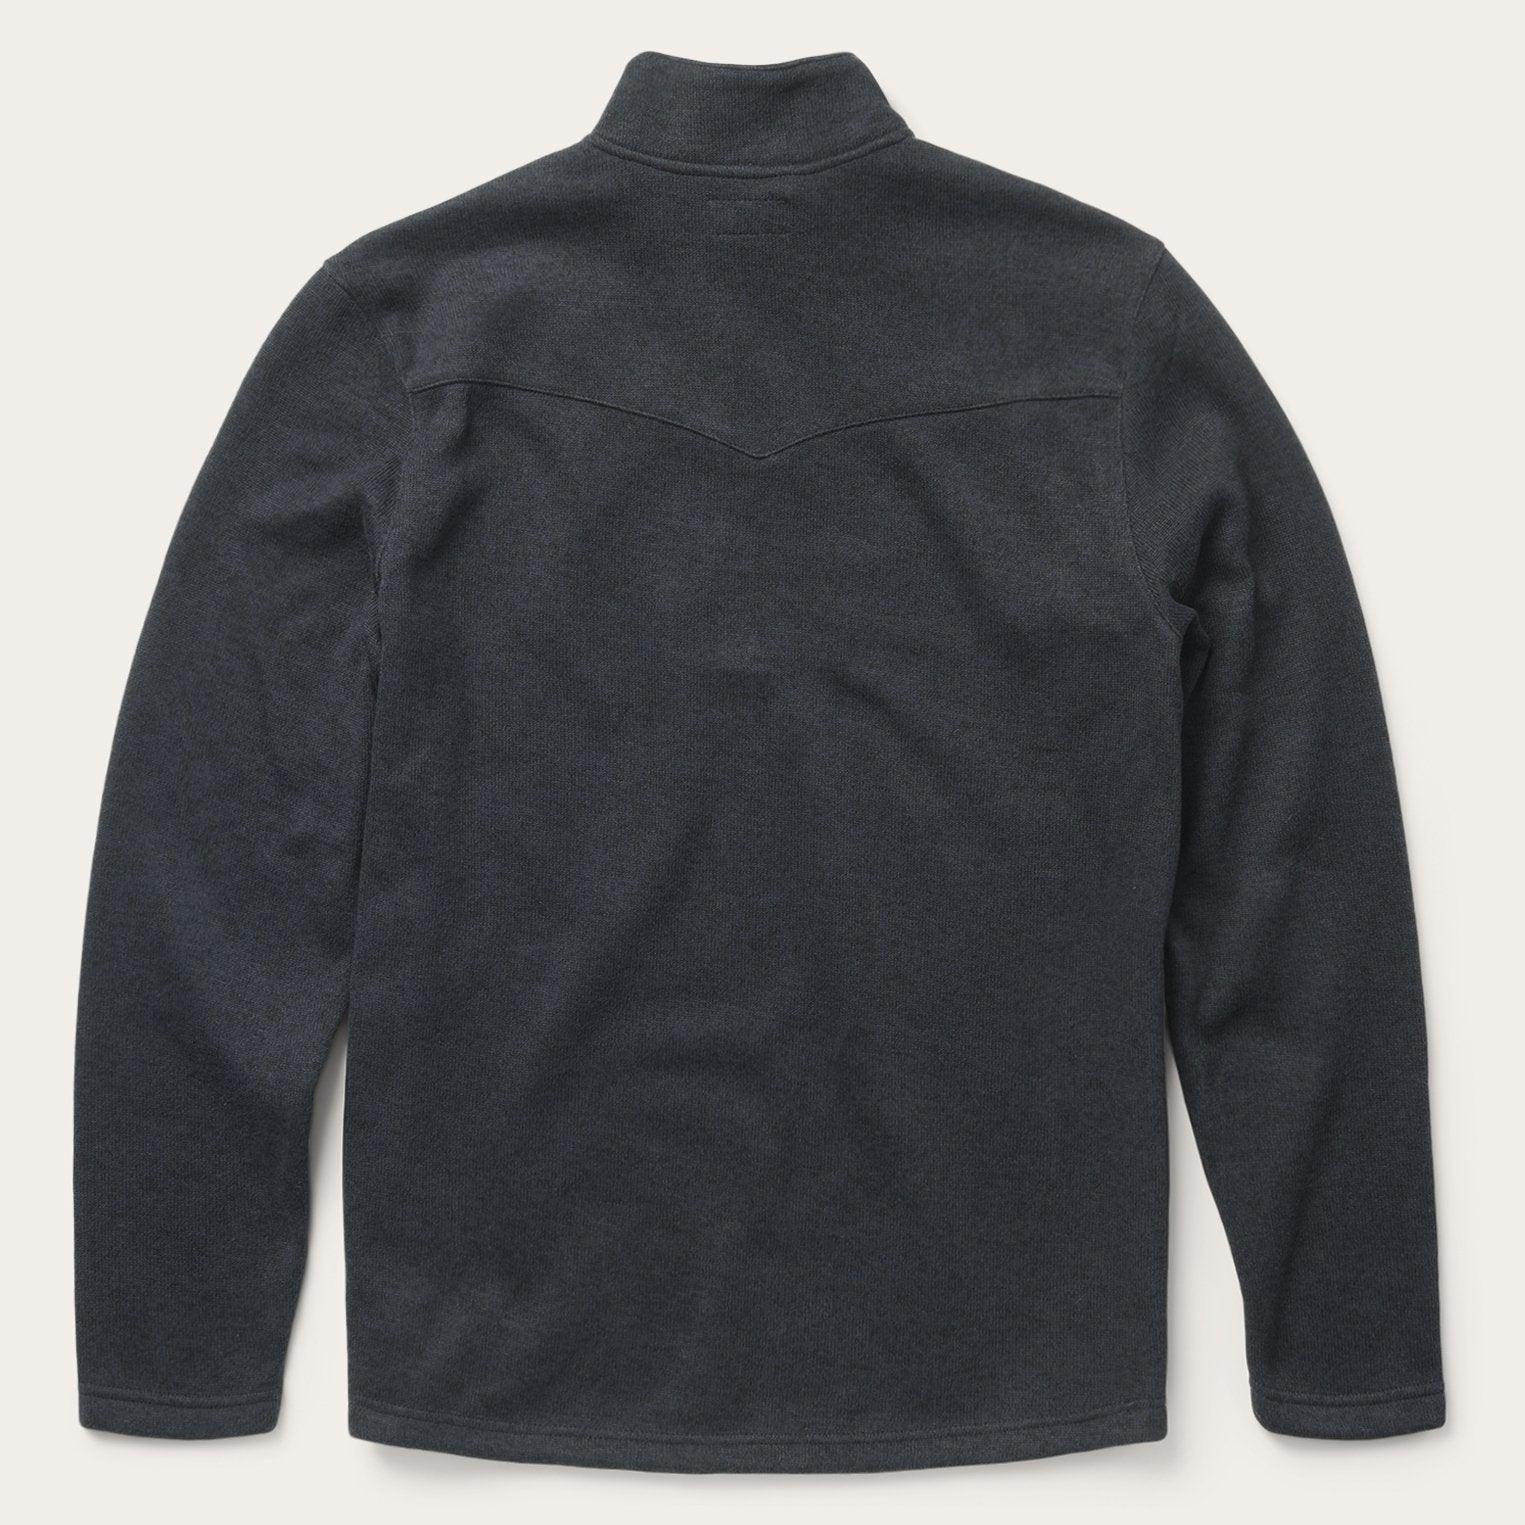 Stetson Gray Pullover Knit Sweater - Flyclothing LLC